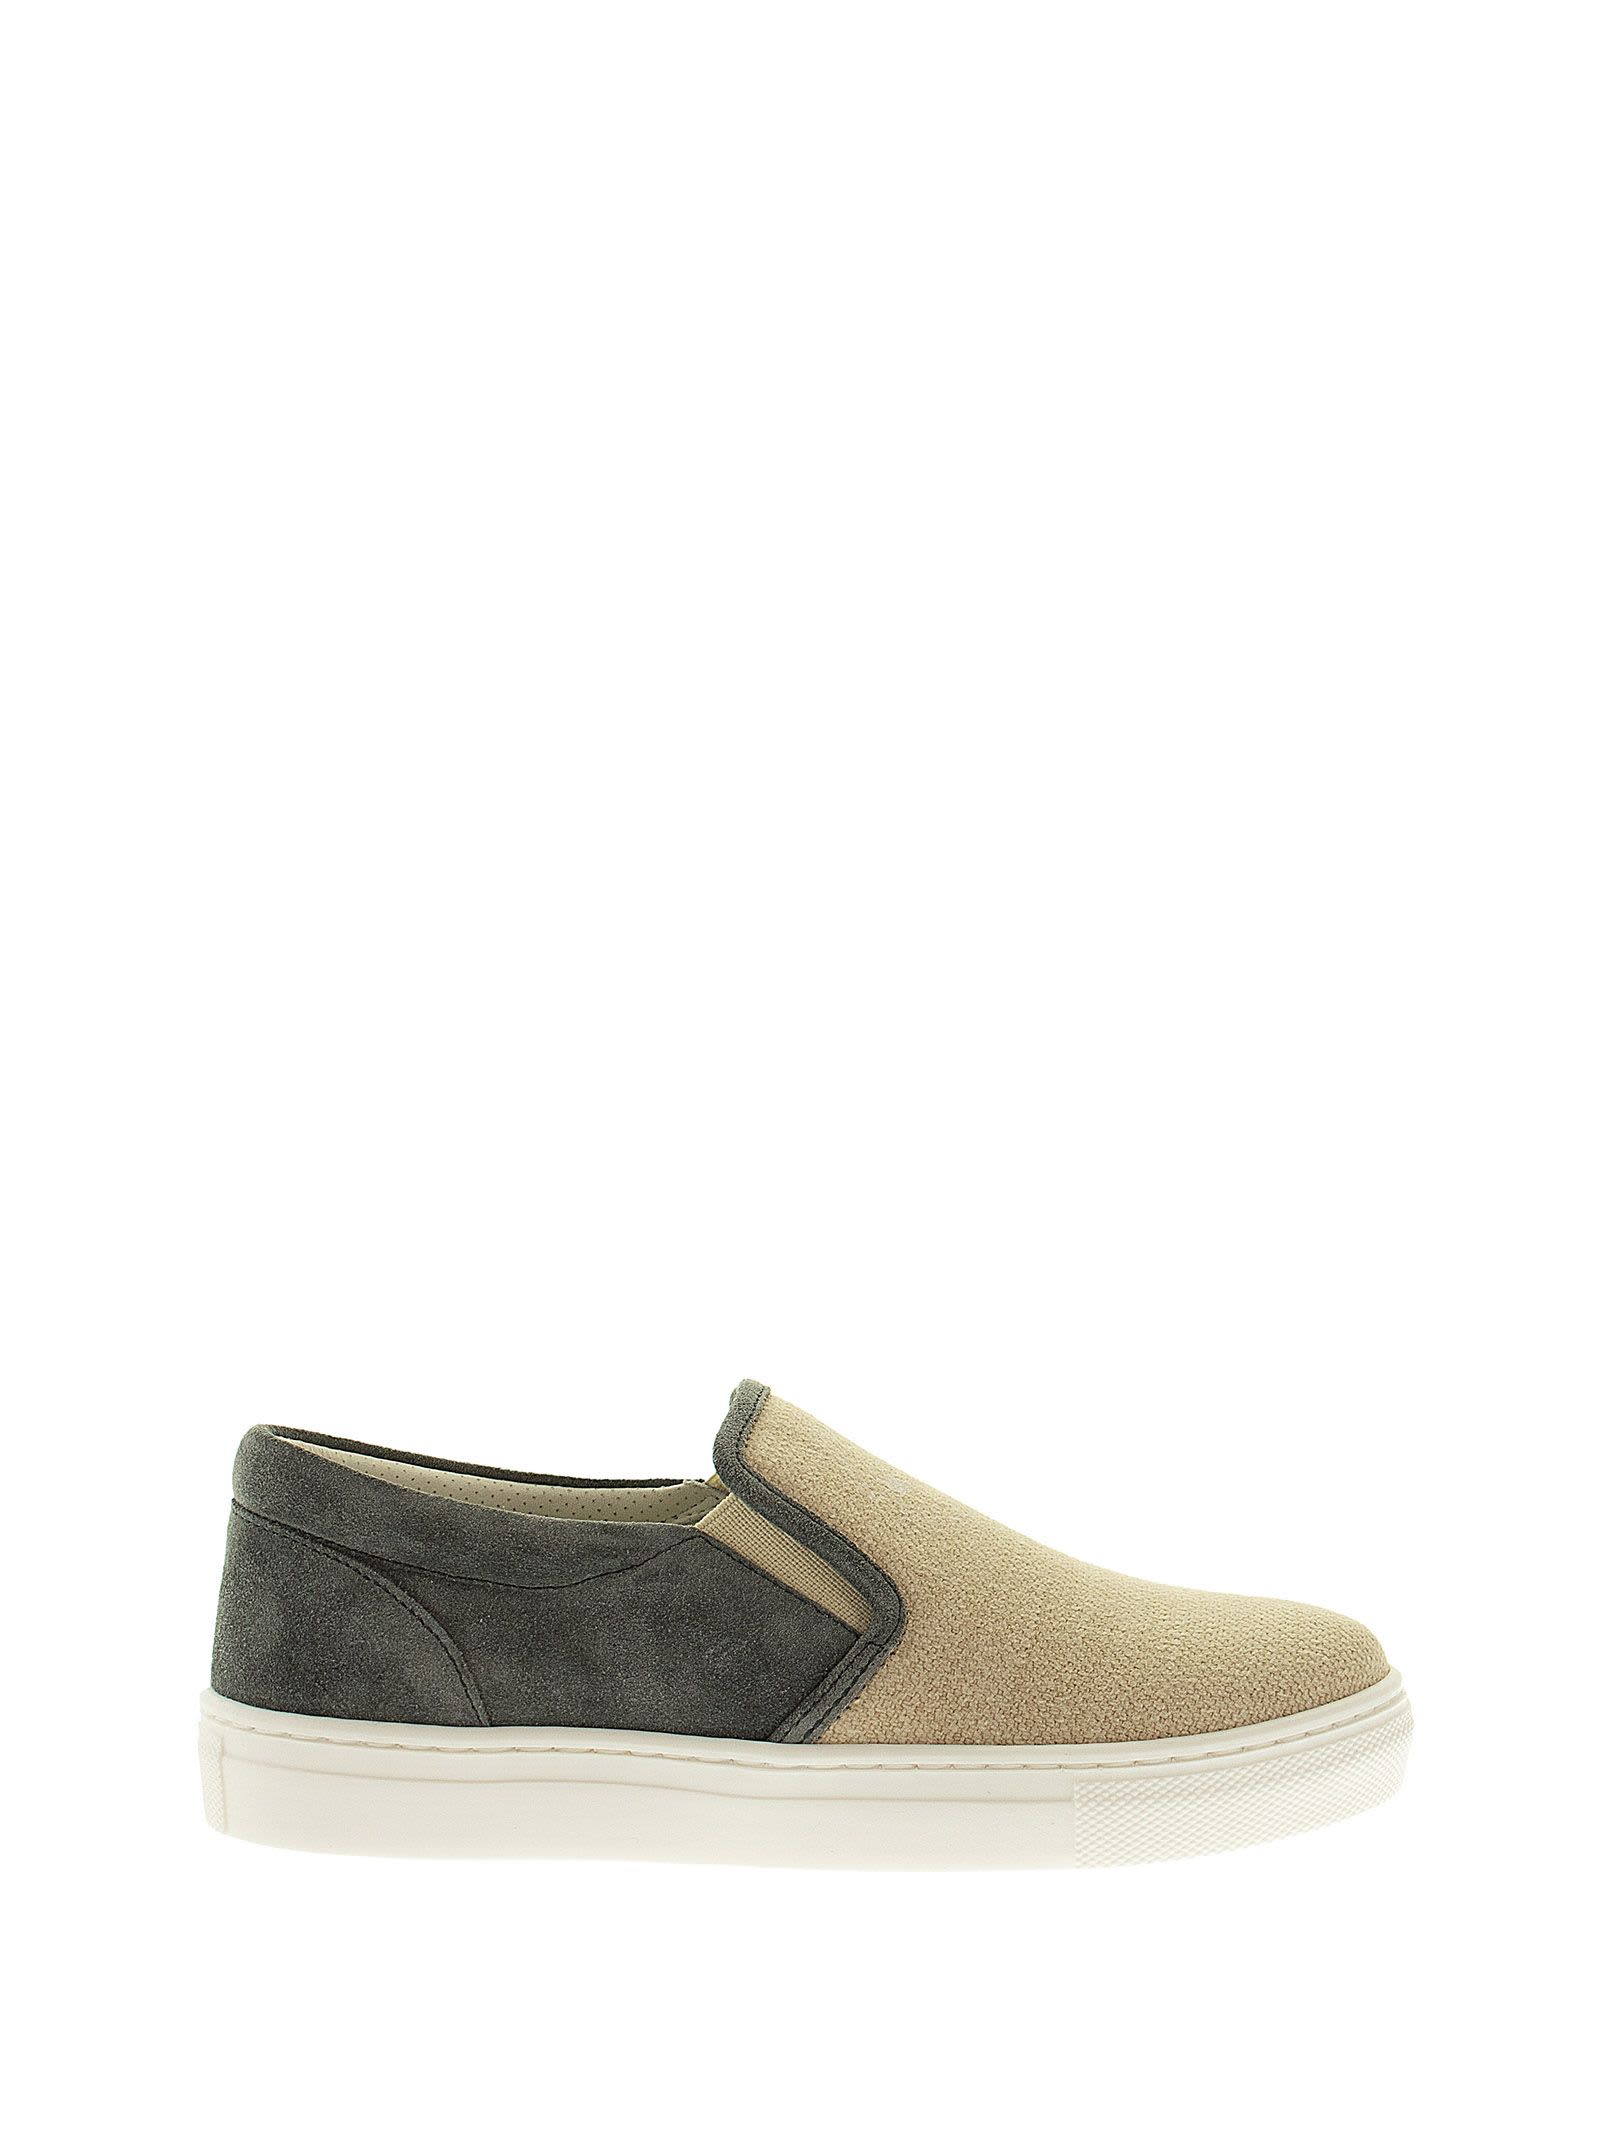 Brunello Cucinelli Canvas And Suede Slip-on Sneakers